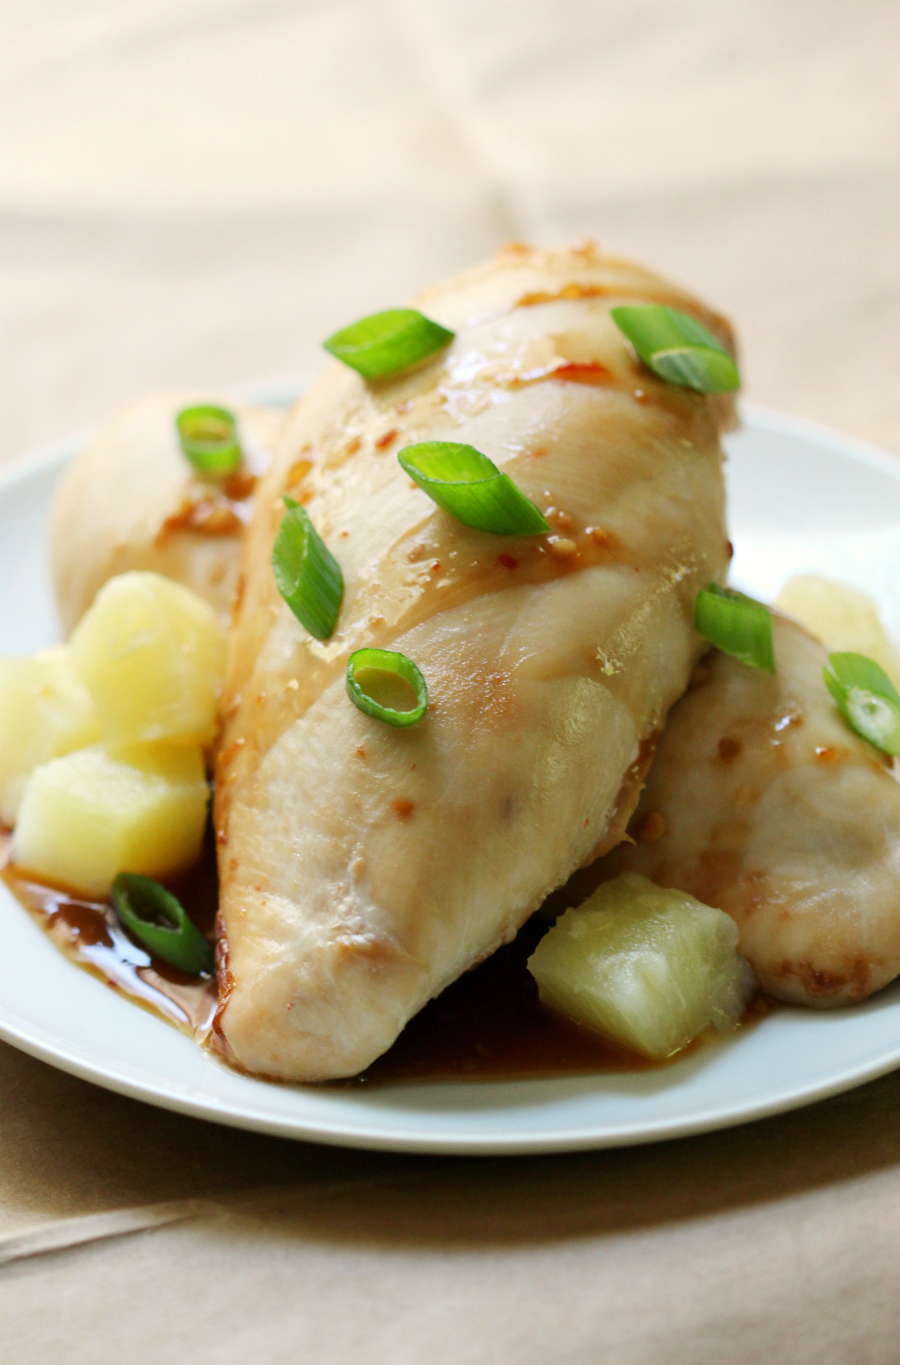 Pineapple Teriyaki Chicken | Strength and Sunshine @RebeccaGF666 Everyone loves some teriyaki! This Pineapple Teriyaki Chicken is gluten-free, paleo, and allergy-free! With a sweet homemade sauce recipe to accompany this new family favorite dinner, weeknights just got a lot more healthy and delicious!